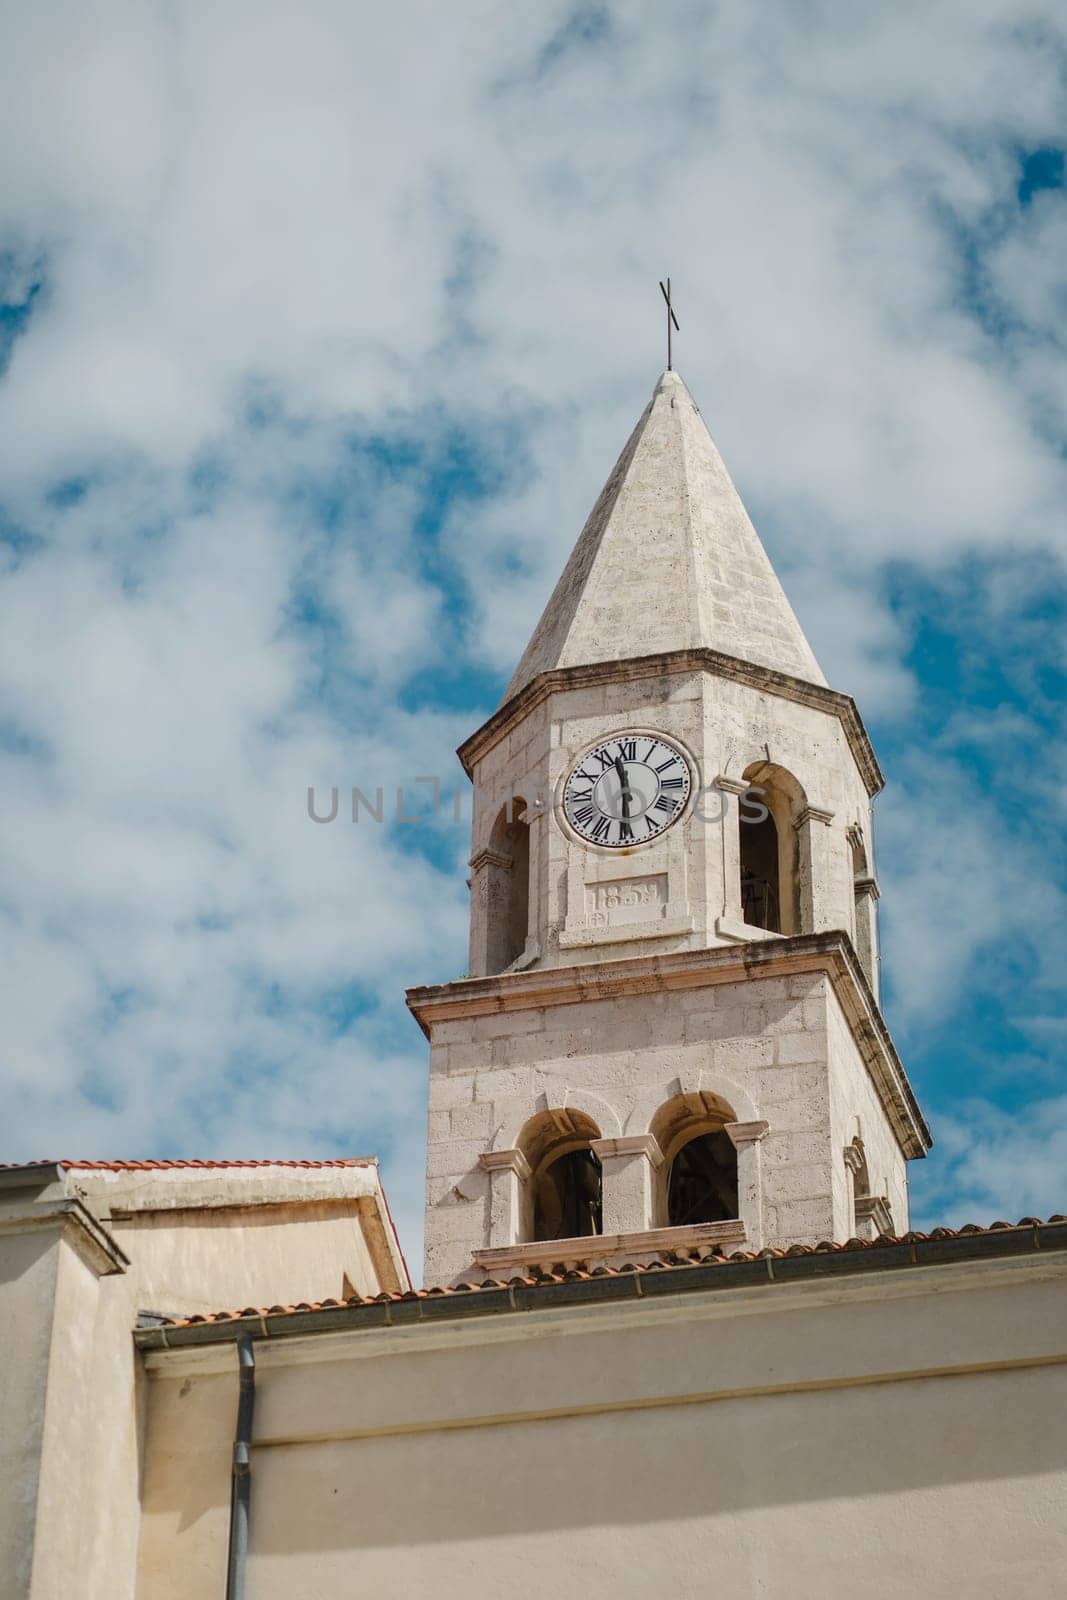 Ancient tower with vintage clock dial and cloudy blue sky in Old Town, Biograd na Moru in Croatia